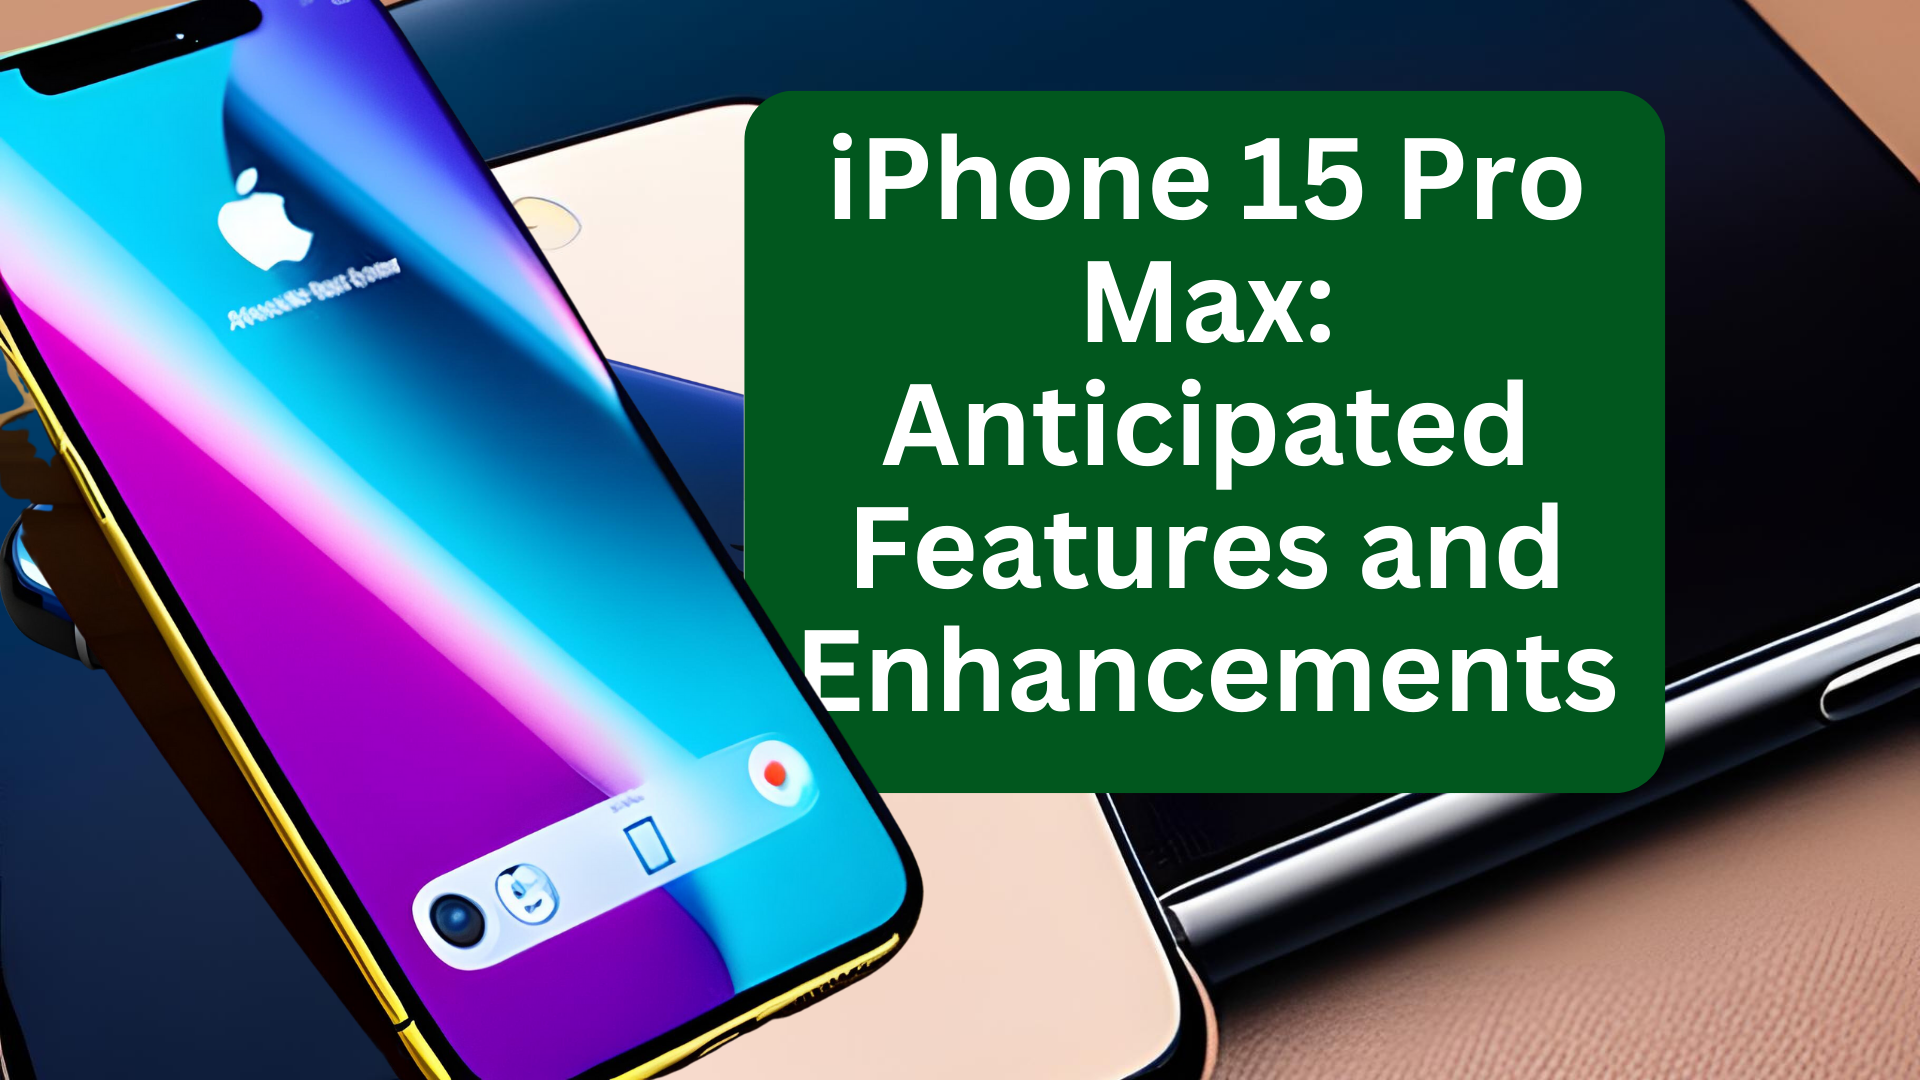 iPhone 15 Pro Max: Anticipated Features and Enhancements